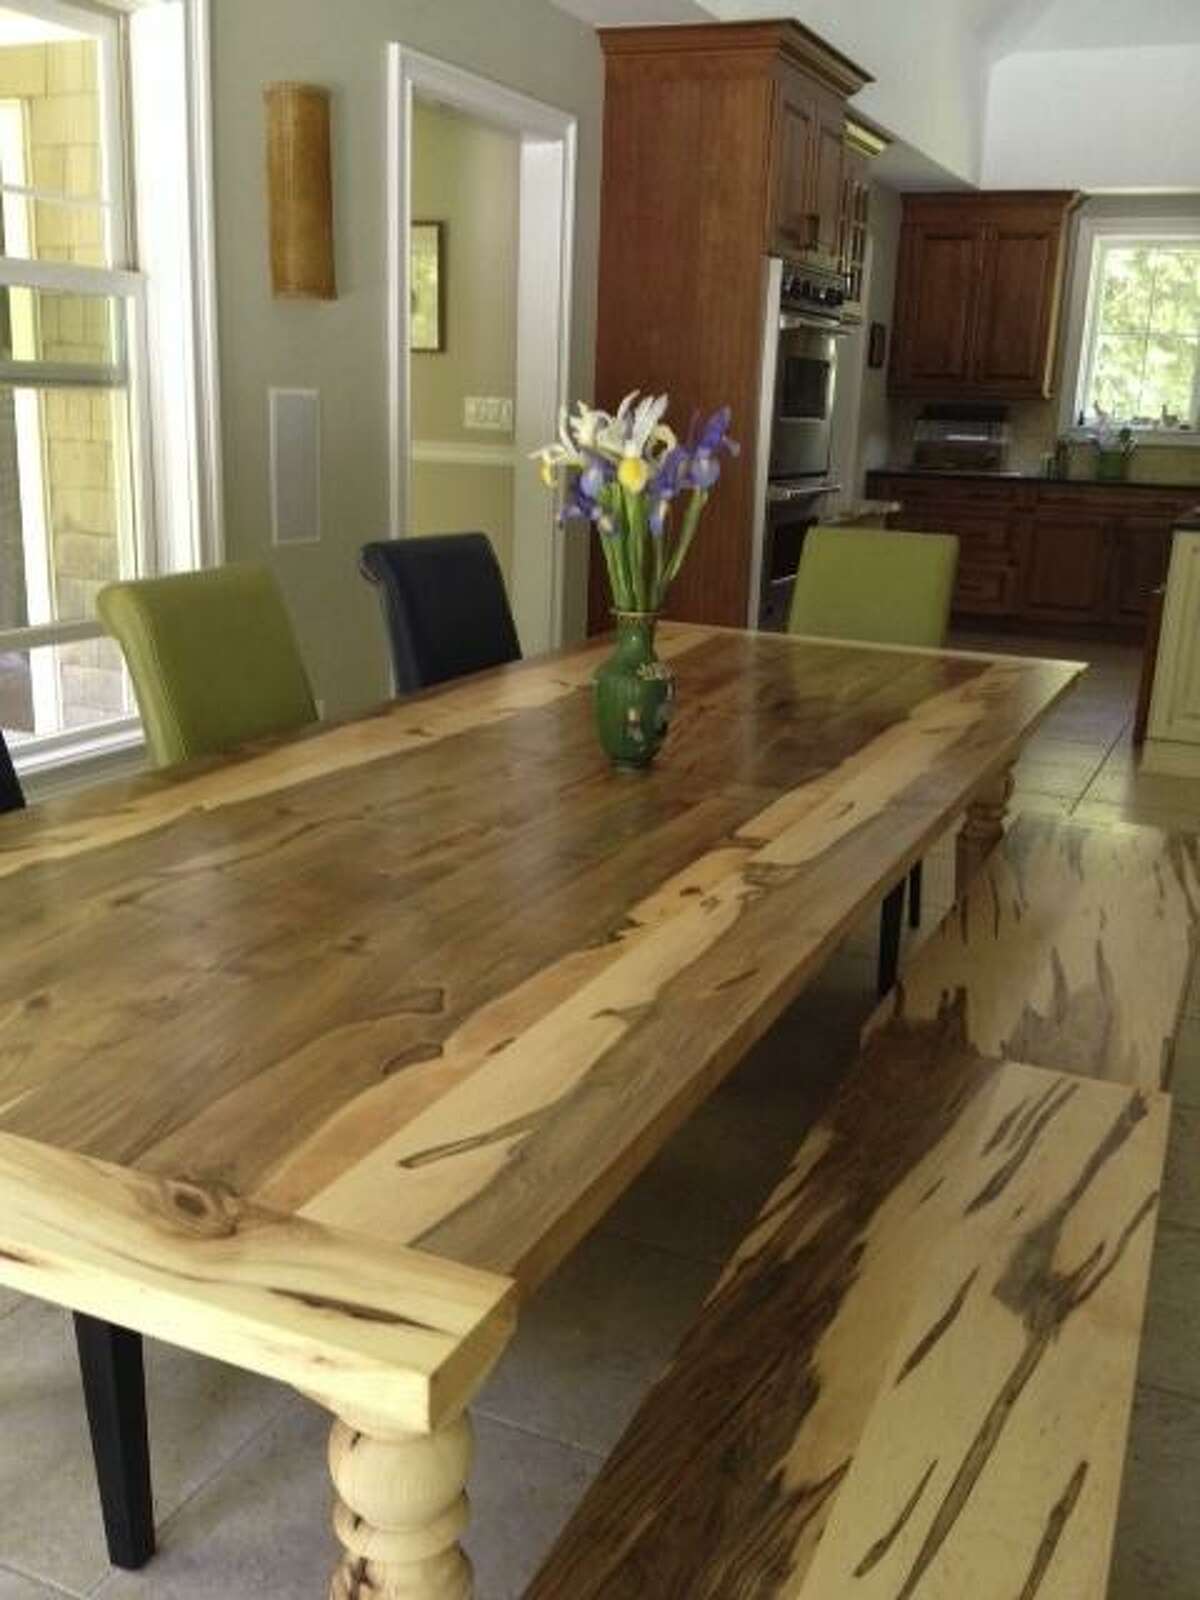 A farm-style table made by City Bench for a Woodbridge family from a tree that fell on their property.